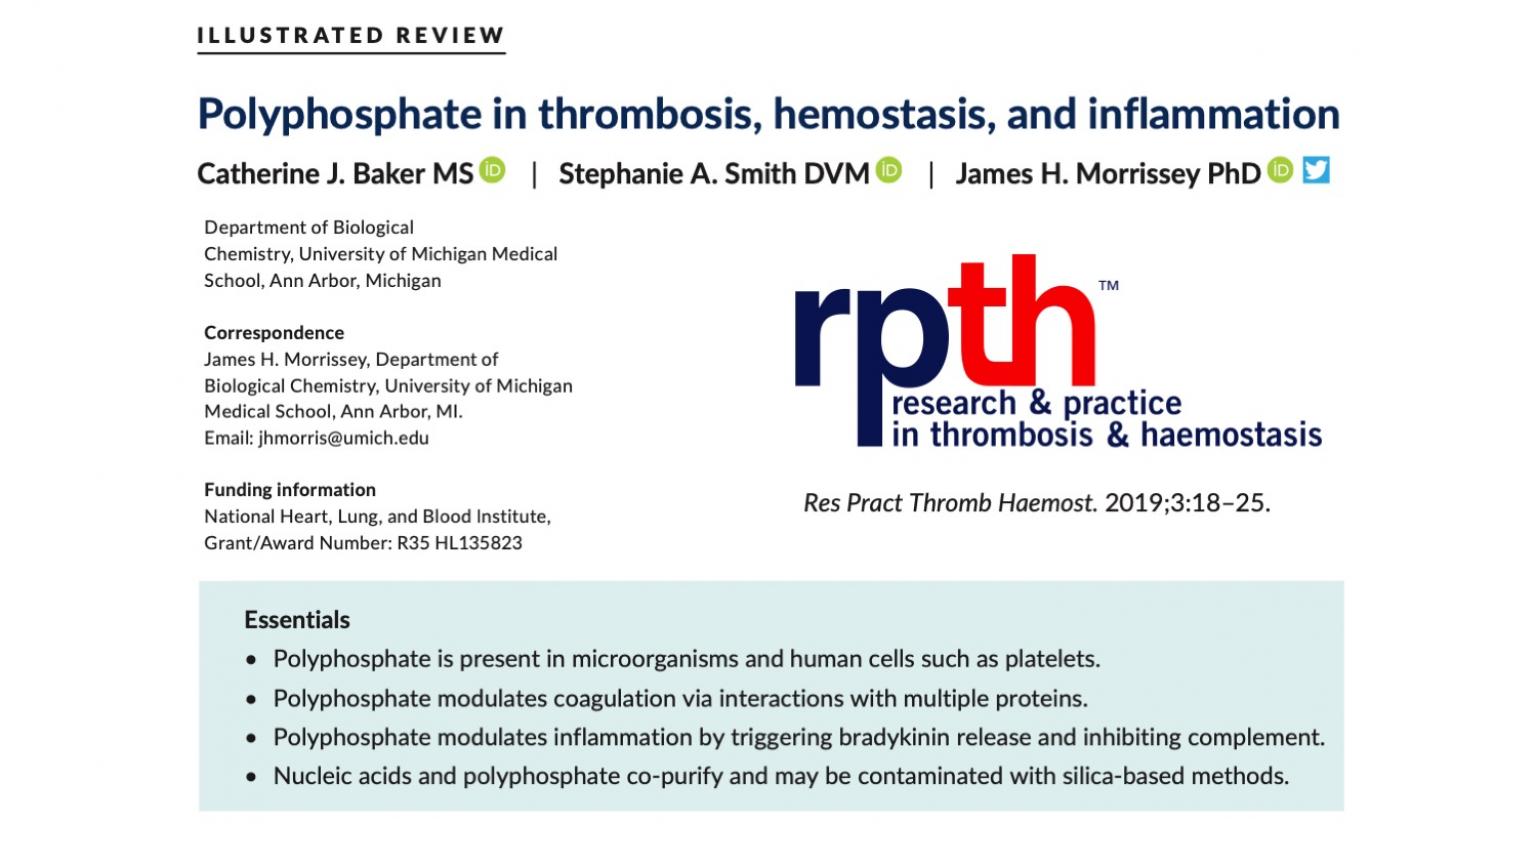 Polyphosphate in thrombosis, hemostasis, and inflammation